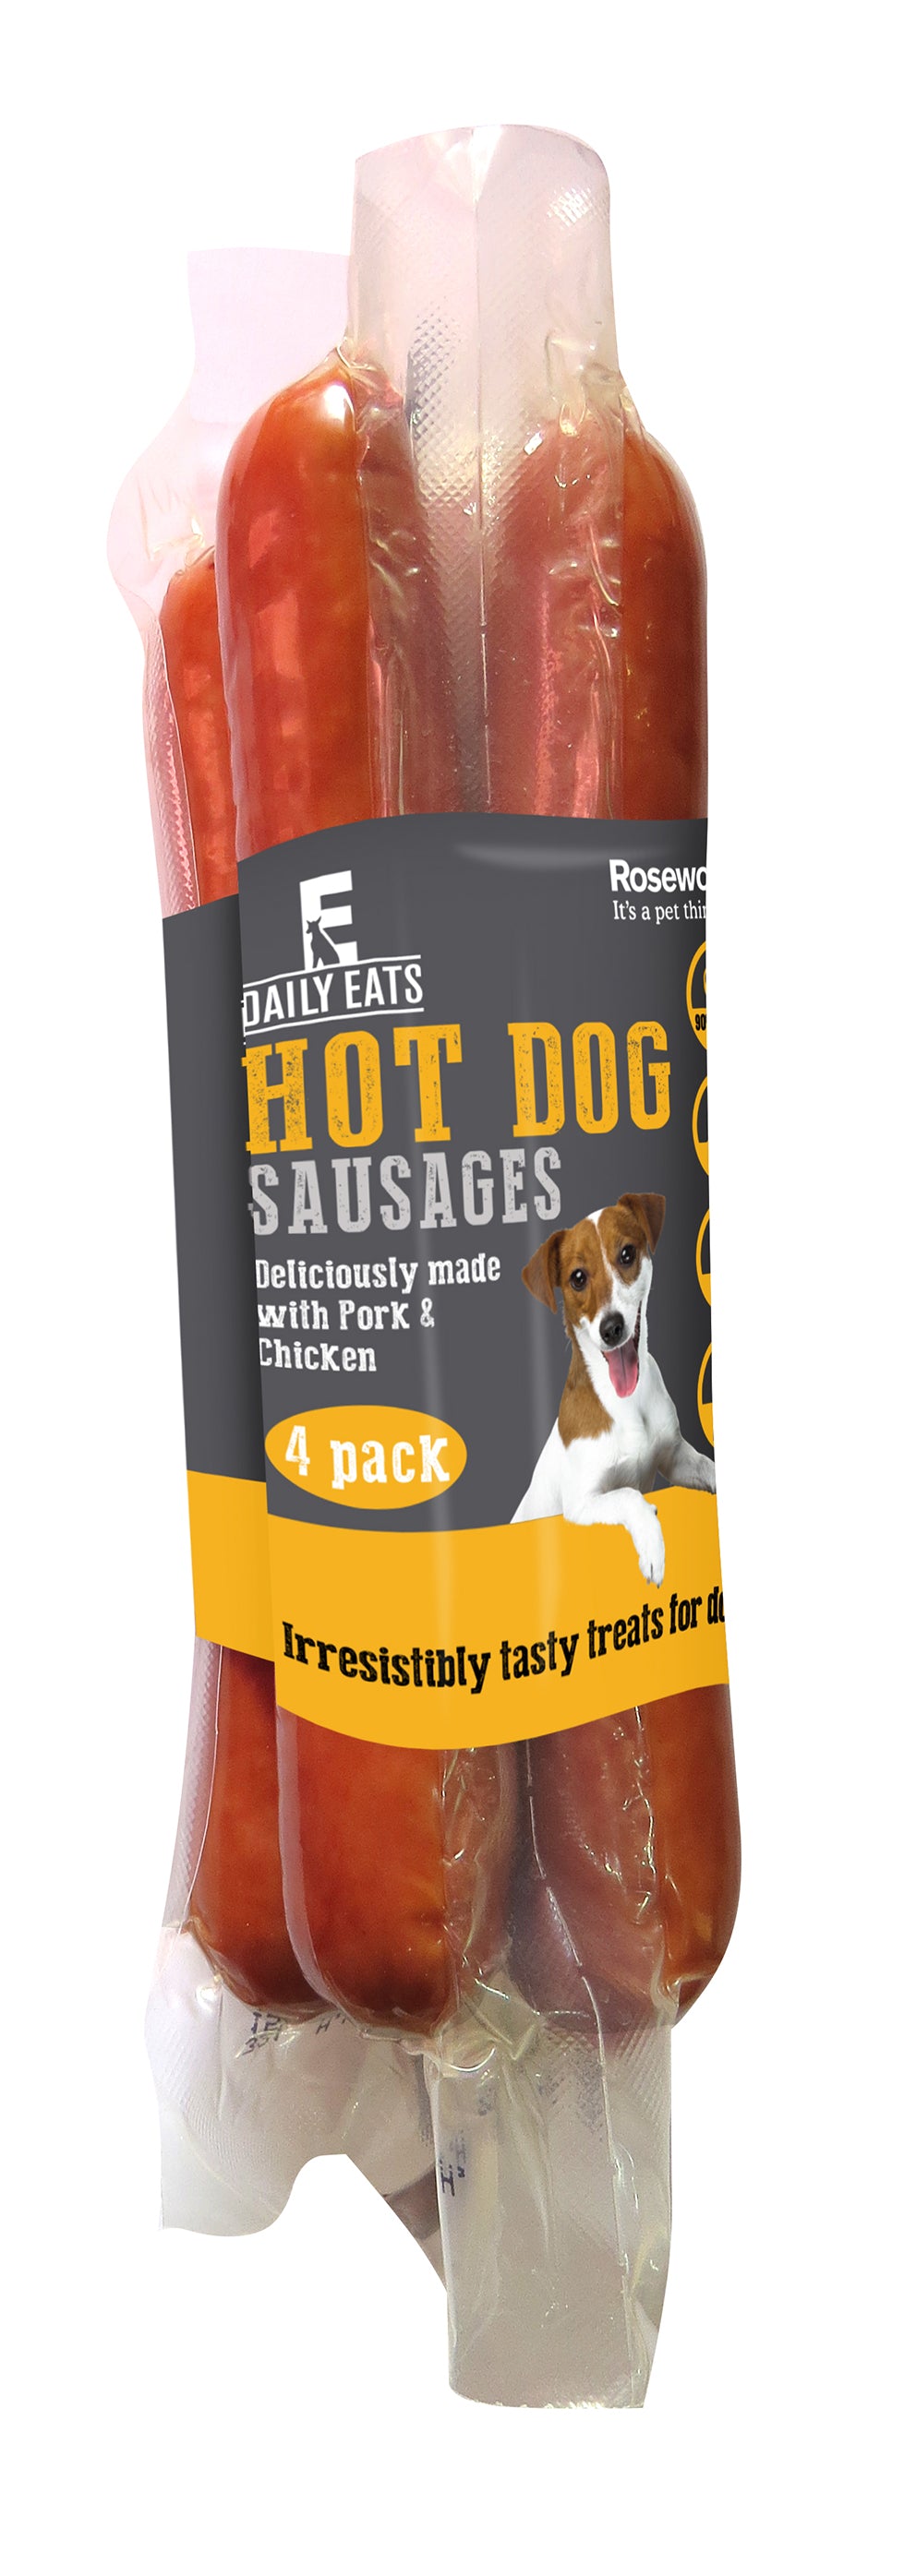 Hot Dog Sausages for Dogs 4 pack